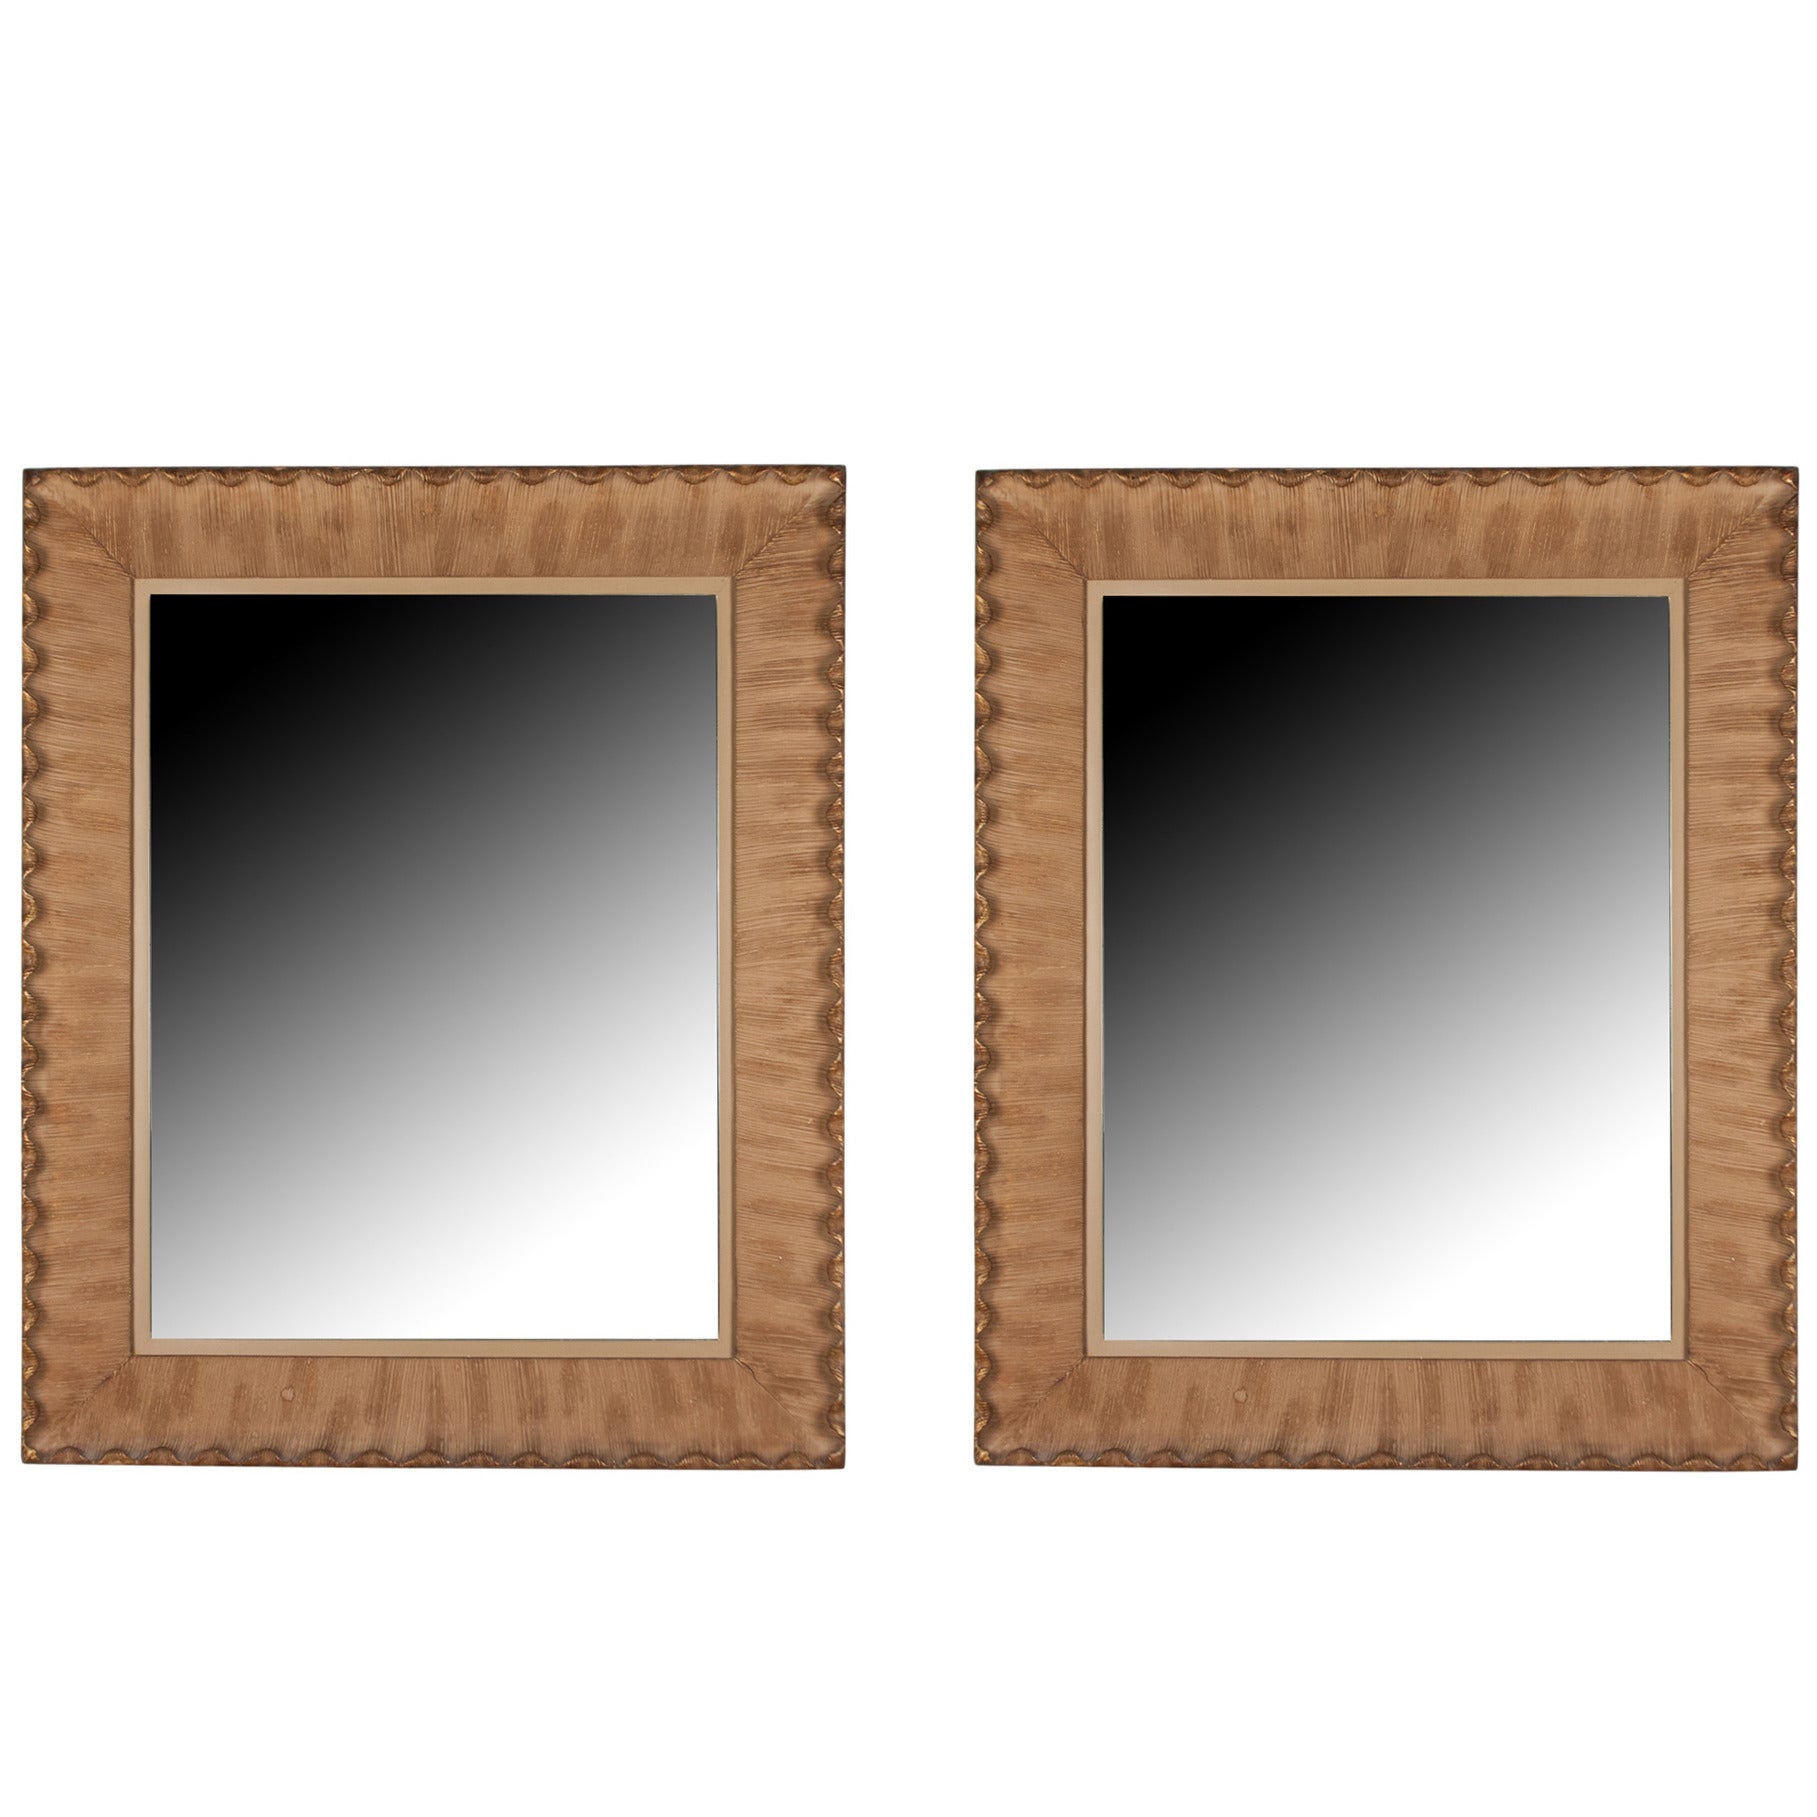 Pair of Mirrors in Gilt-Decorated Frames, French, 1940s For Sale